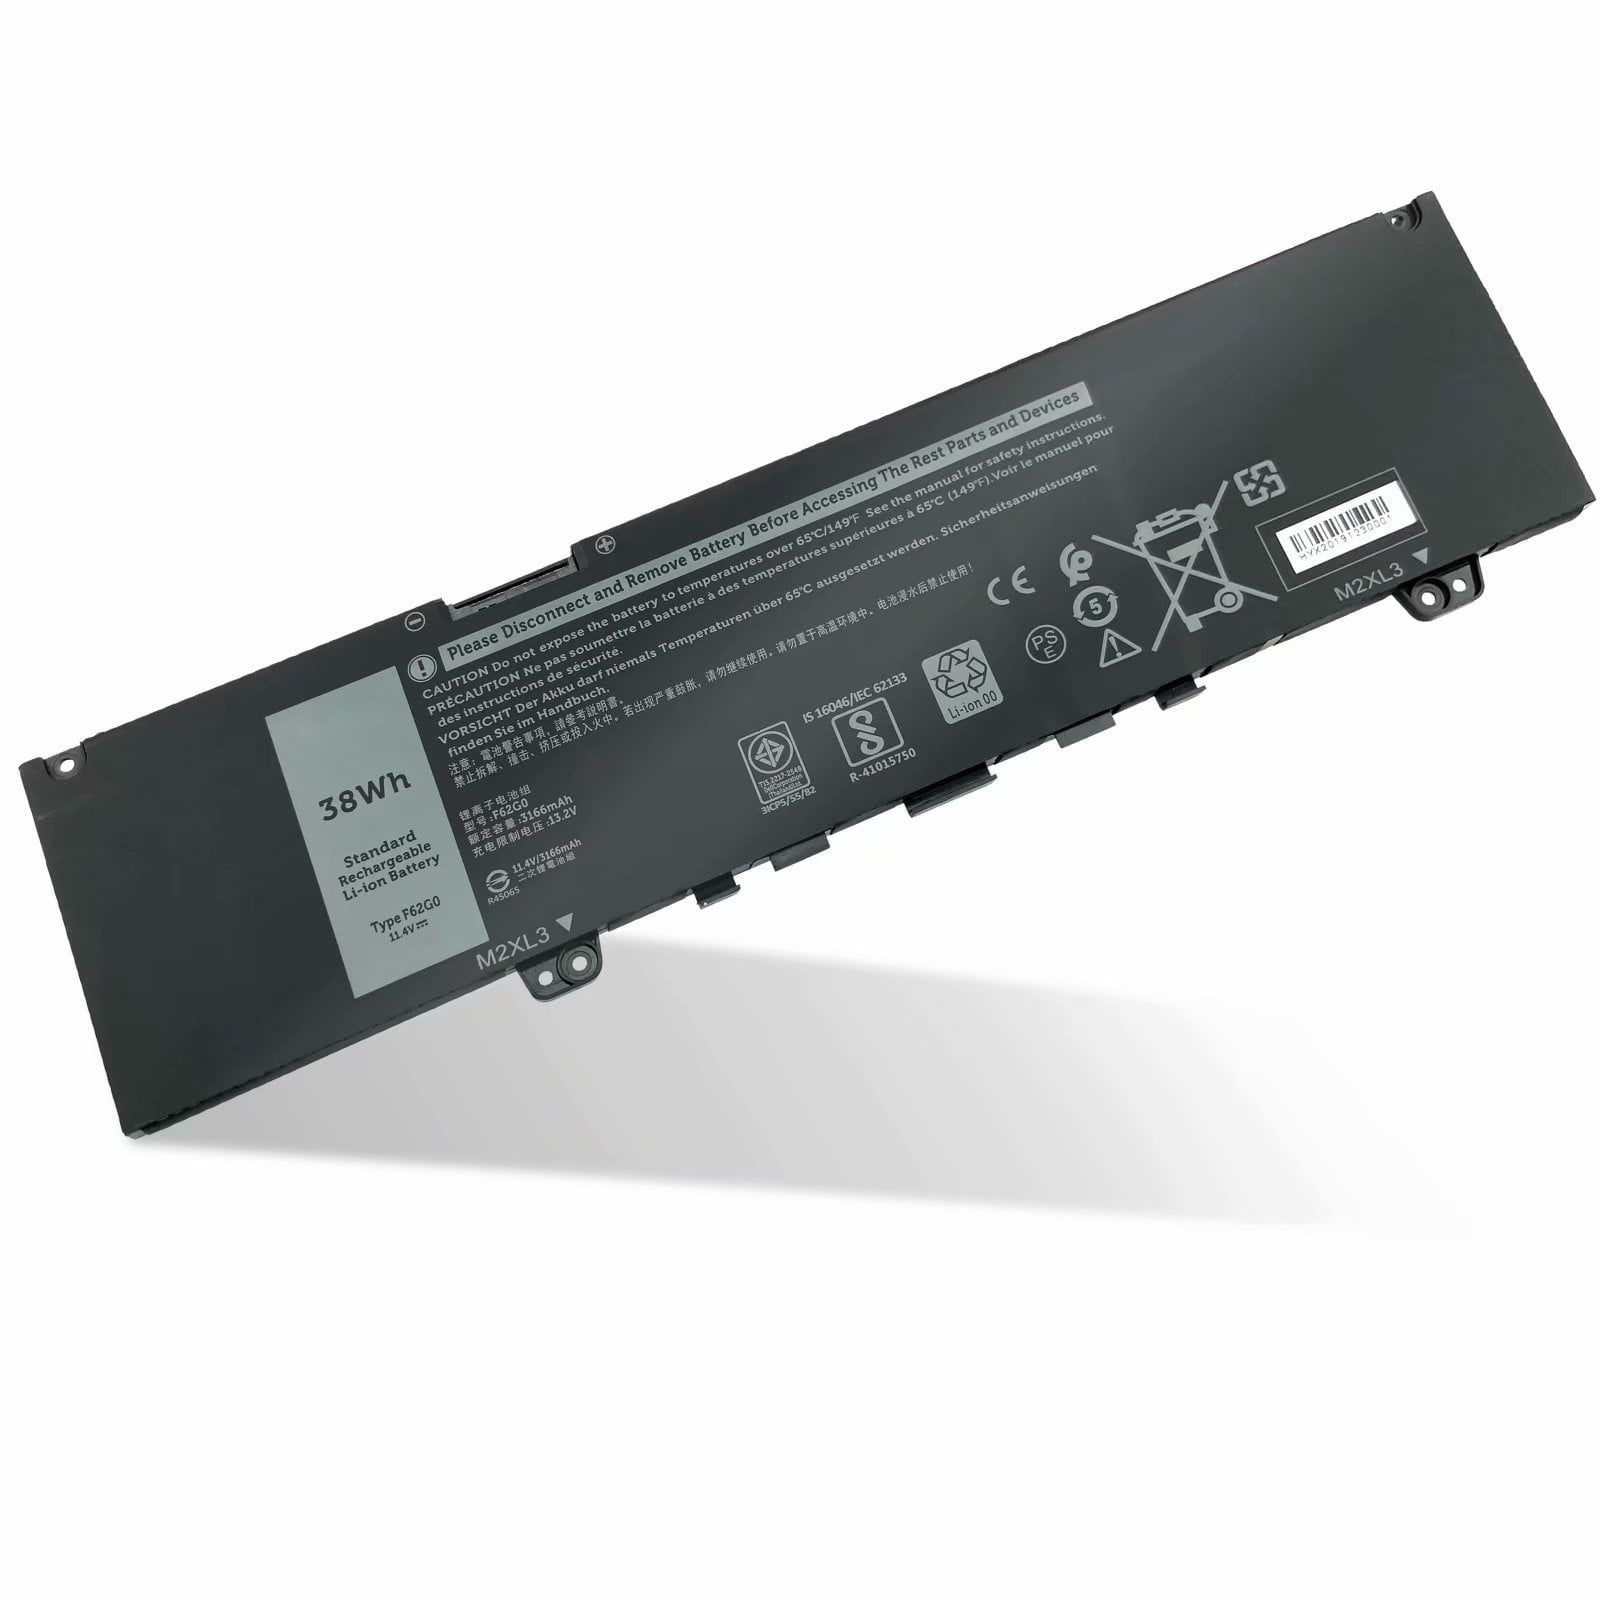 F62g0 Battery Replacement For Dell Inspiron 13 7000 7370 7380 7386 5370 7373 2 In 1 Pg Vostro 13 5370 D1525s R1605s Series Laptop F62go Rpjc3 0rpjc3 39dy5 039dy5 38wh 11 4v 3166mah Walmart Com Walmart Com